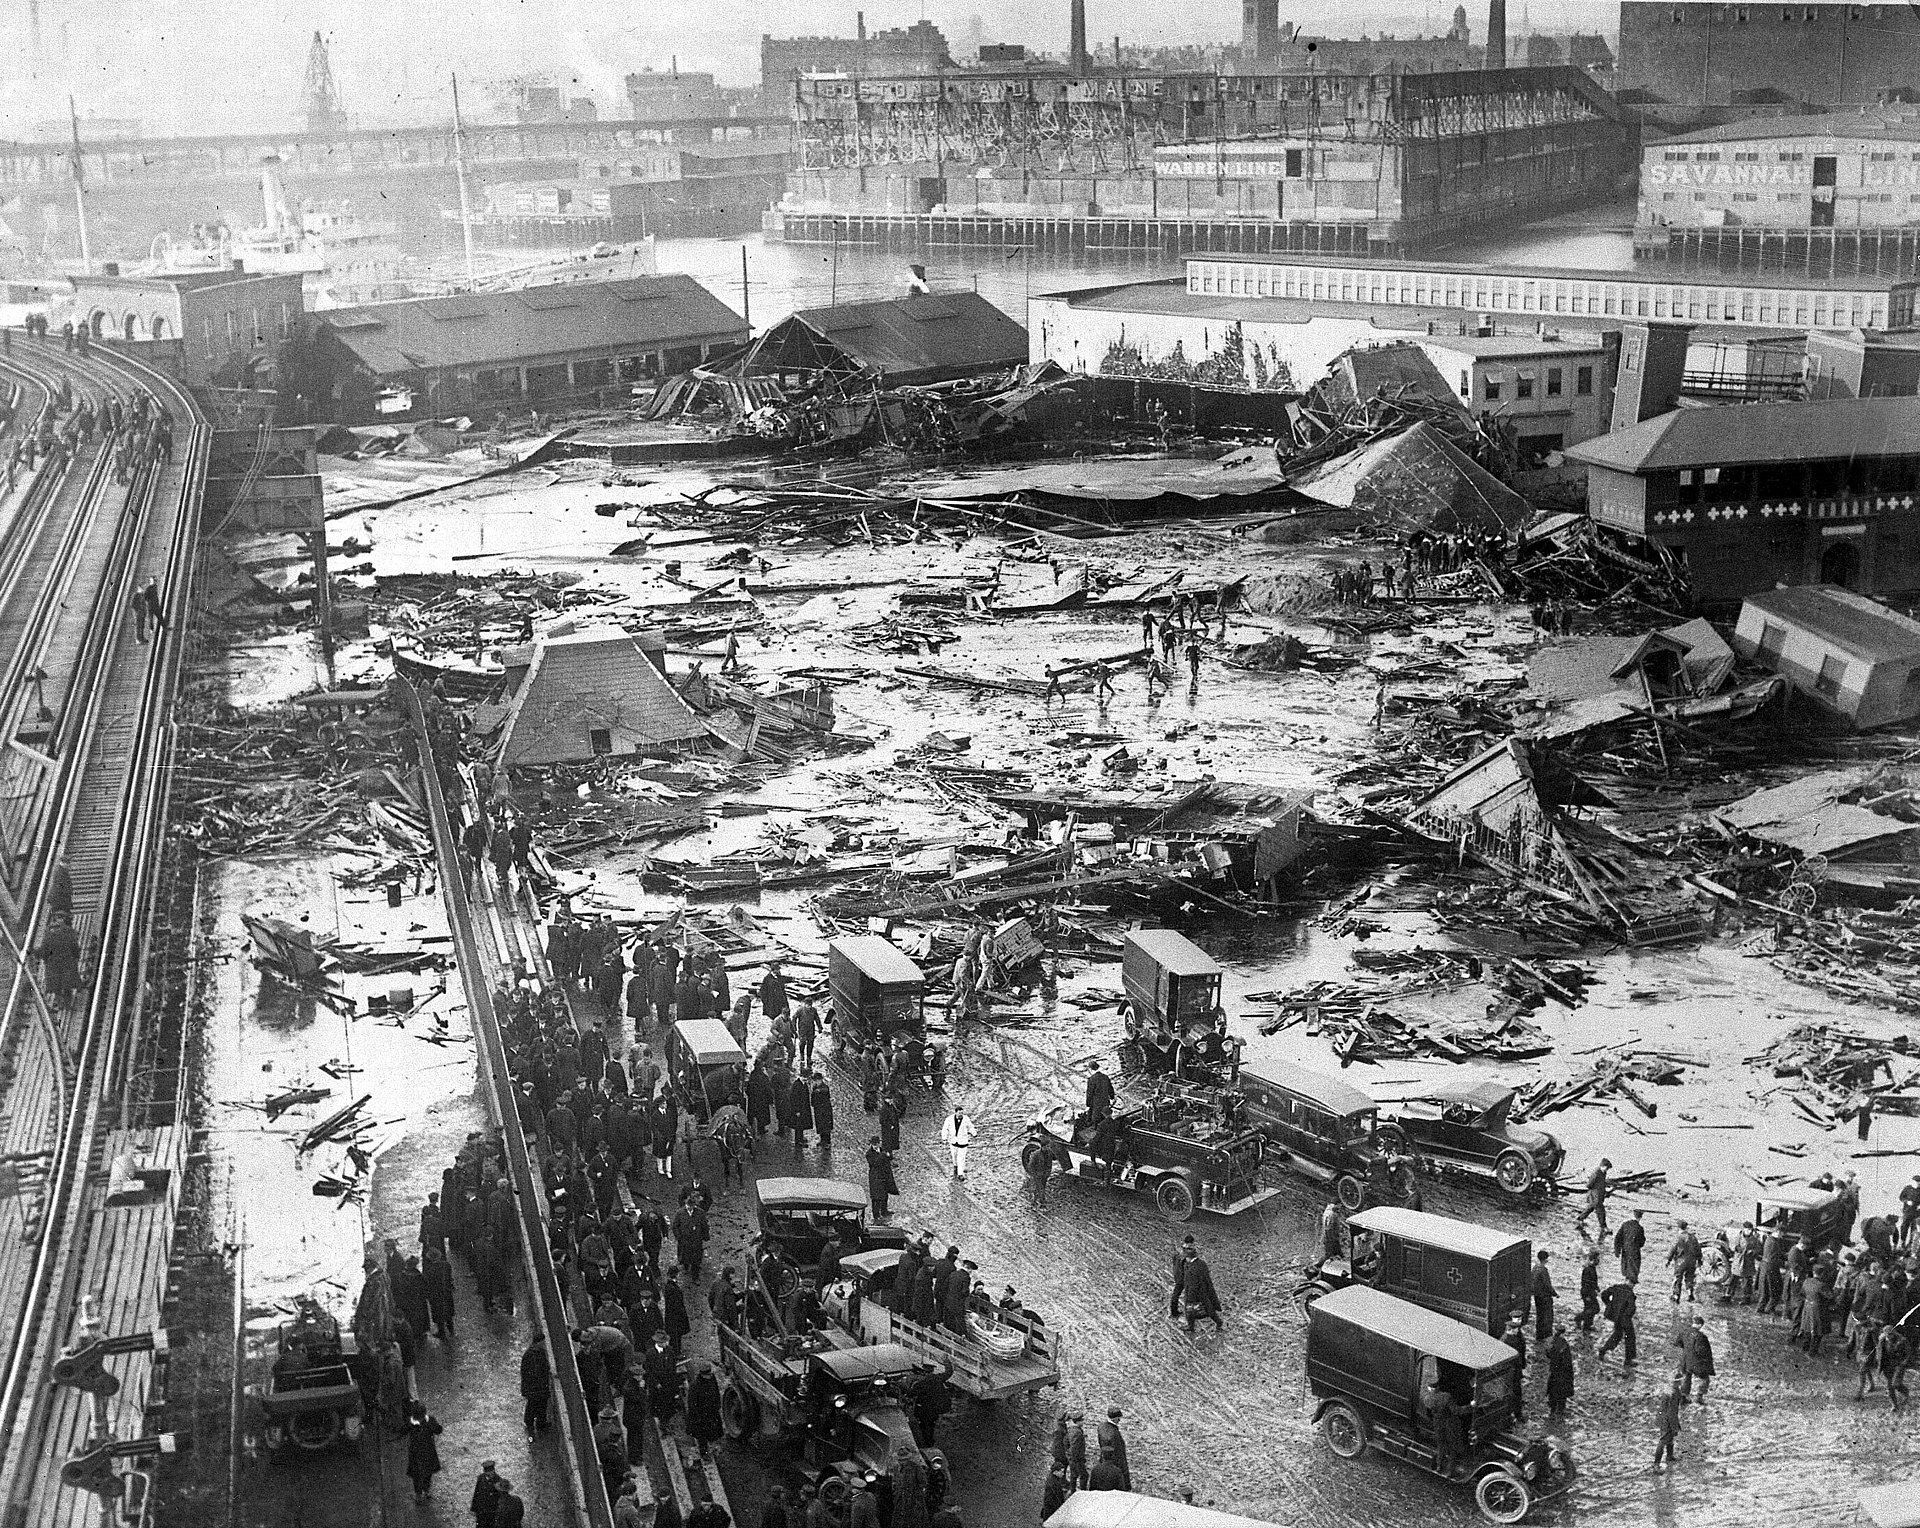 BostonMolassesDisaster The 1919 Great Molasses Flood That Turned Boston Into A Sticky Mess